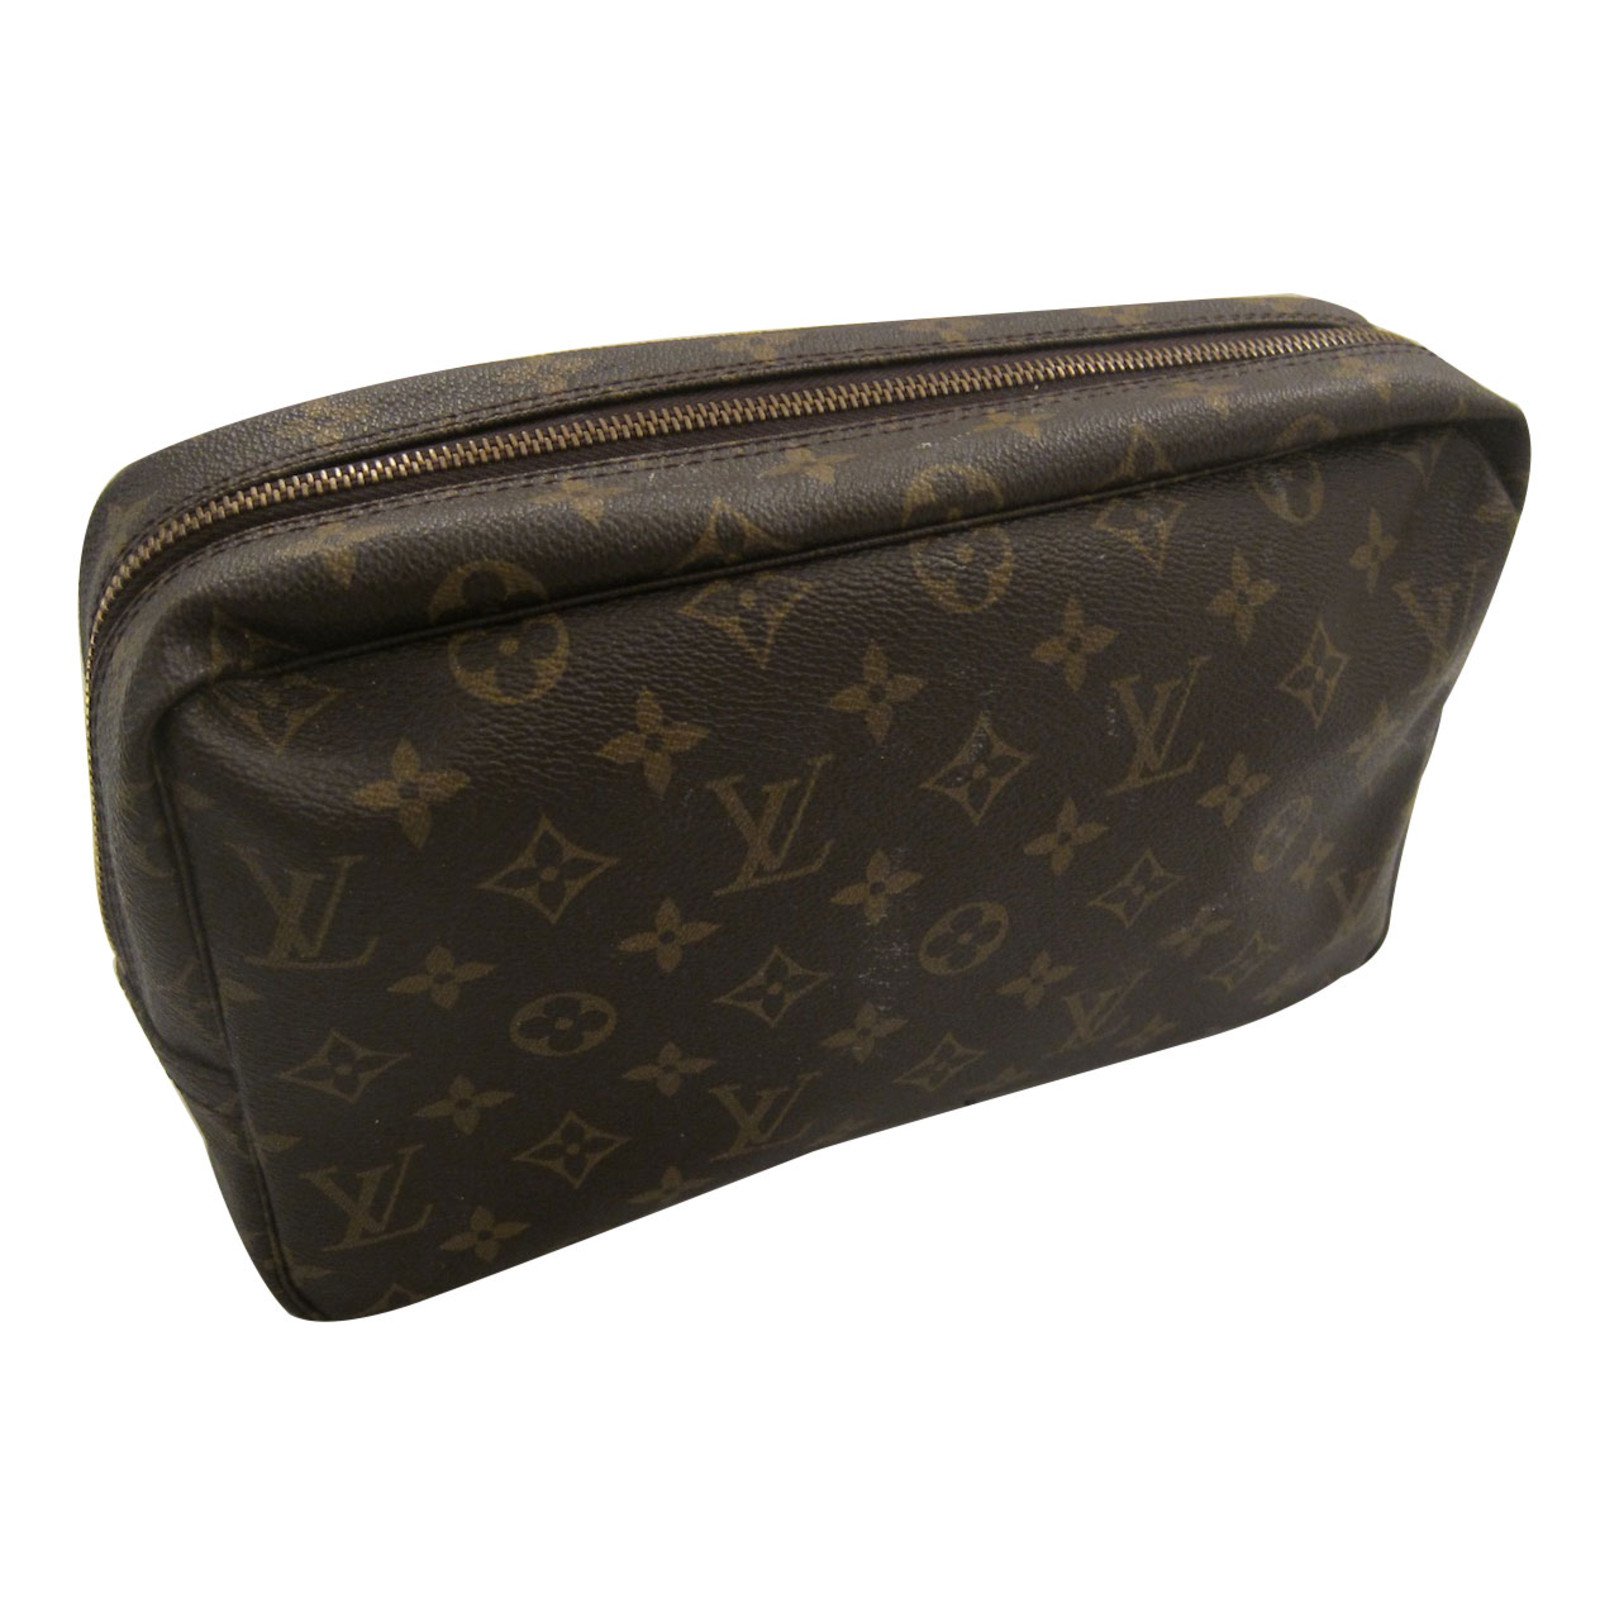 Authentic Louis Vuitton Toiletry Pouch Small Brown Leather